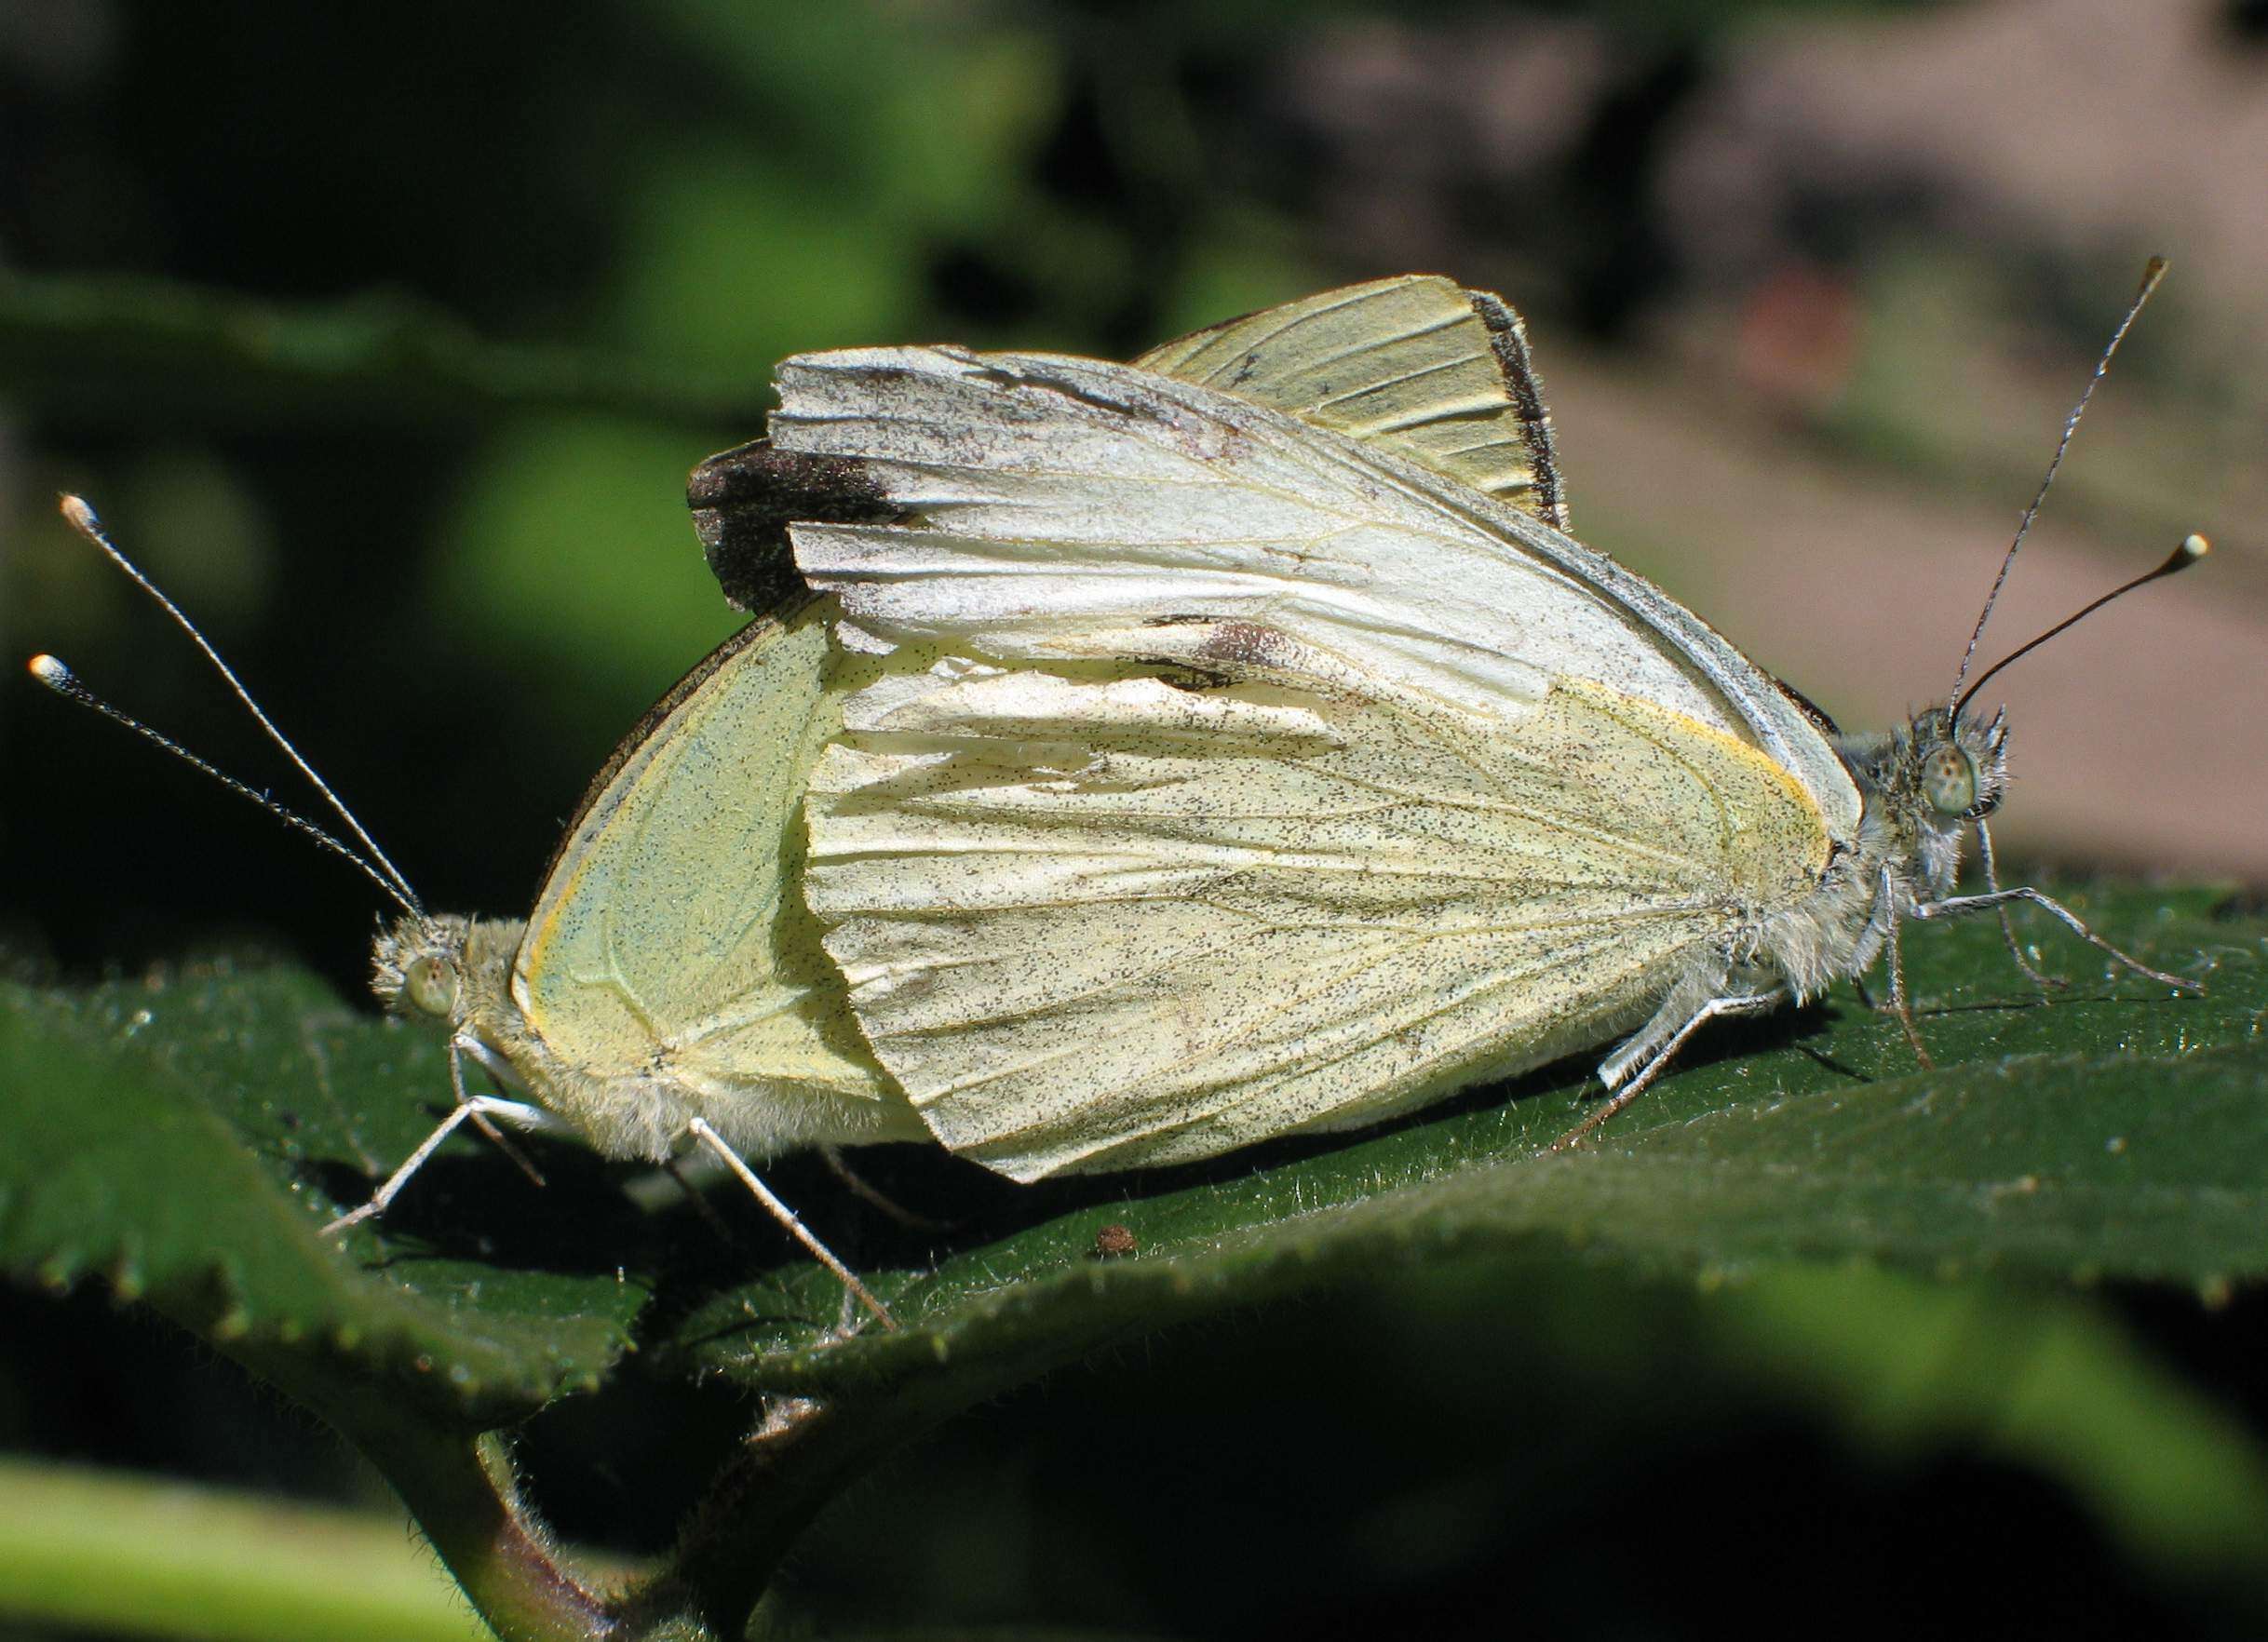 Image of cabbage butterfly